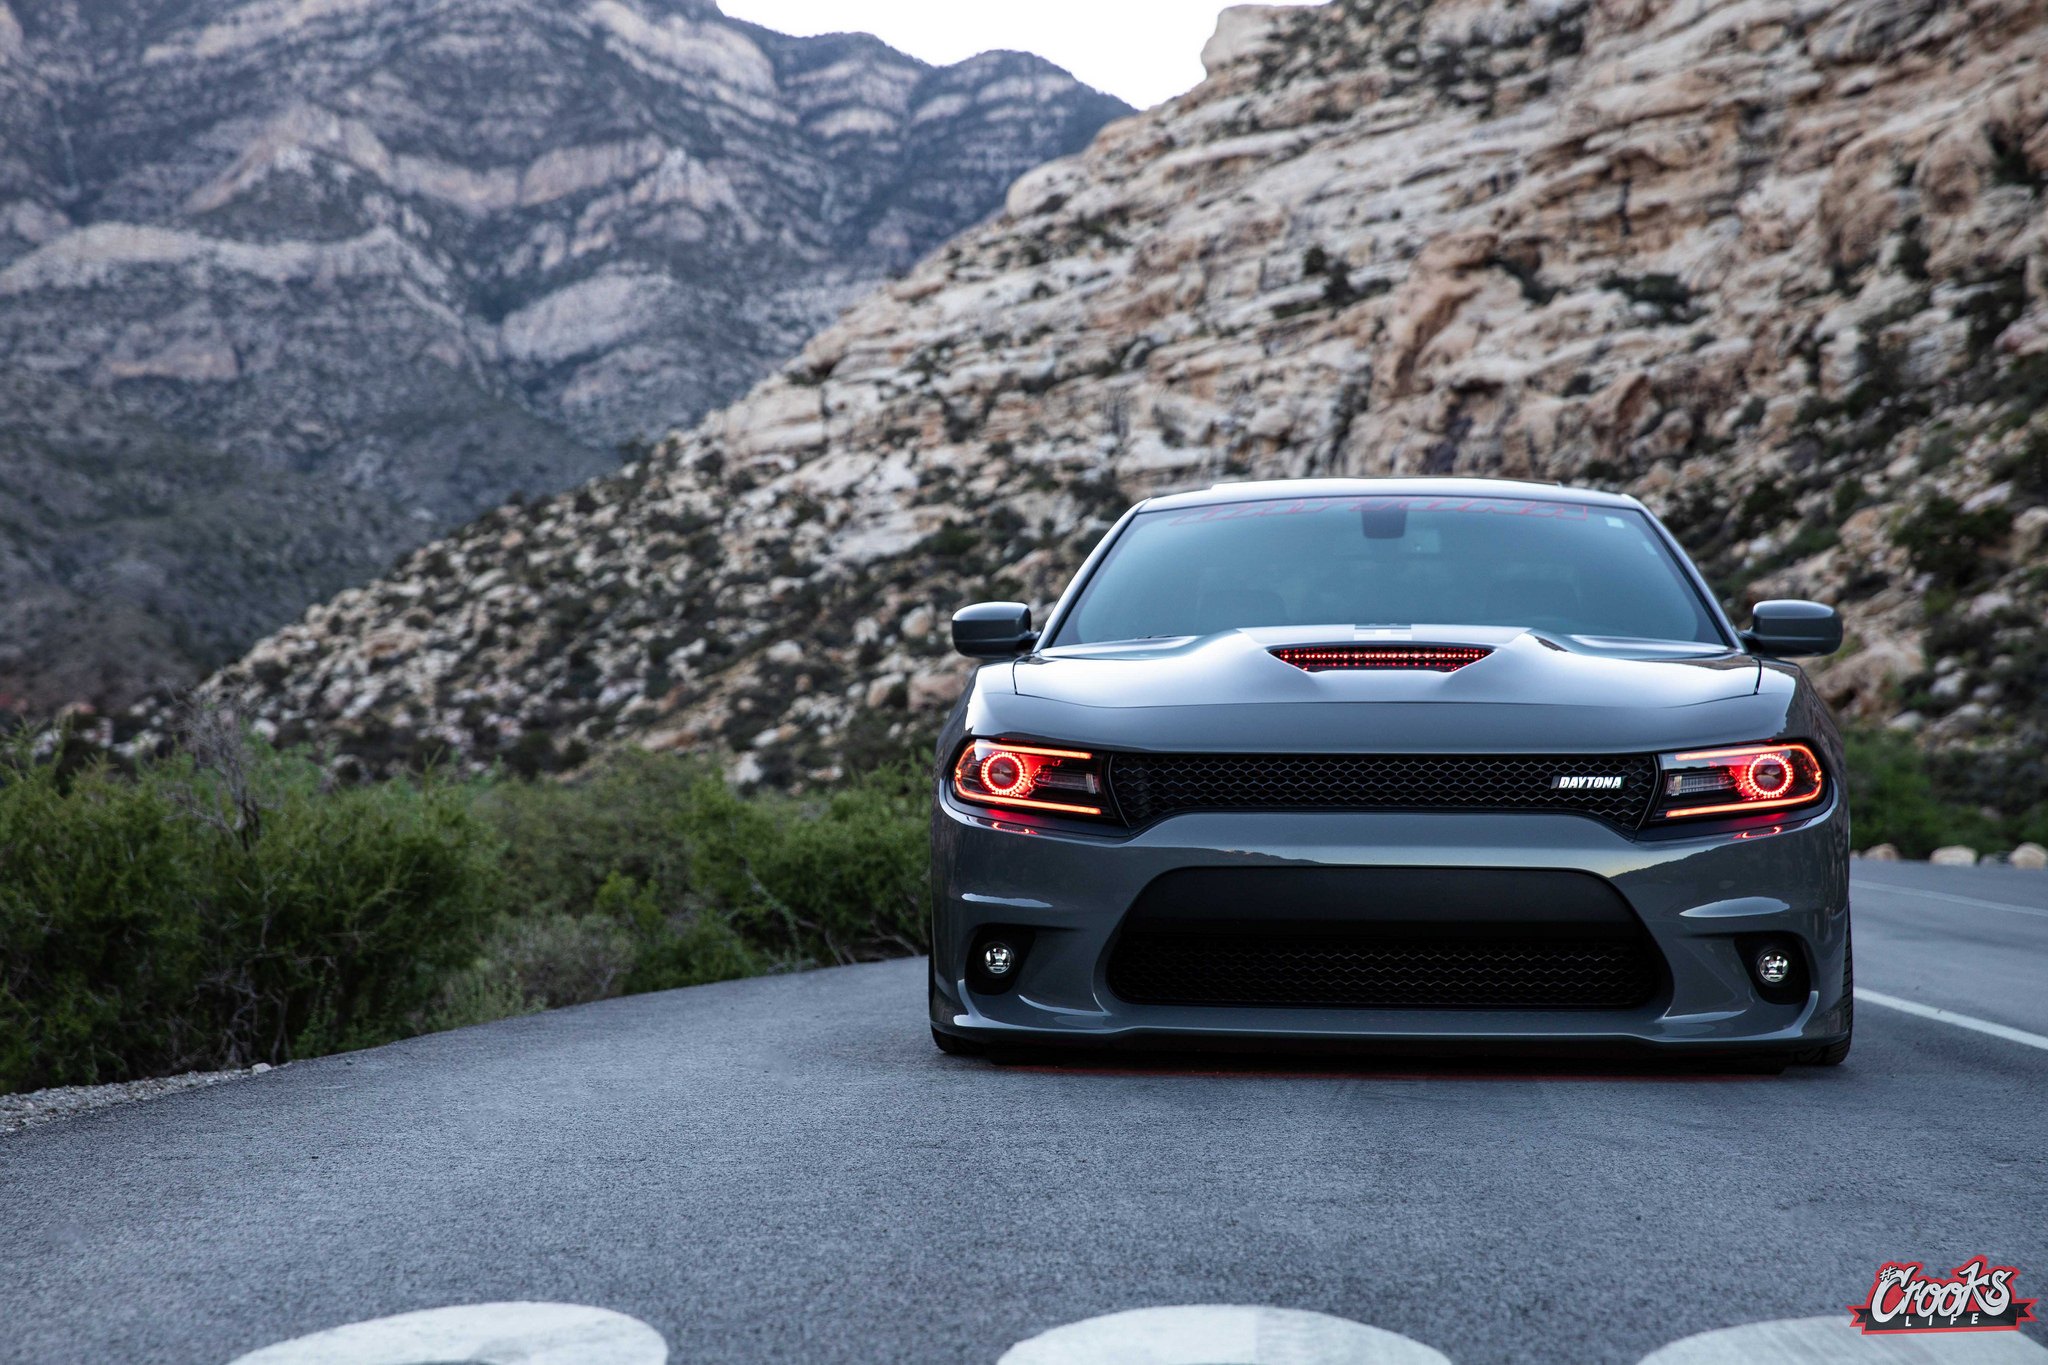 Gray Dodge Charger with Blacked Out Mesh Grille - Photo by Jimmy Crook